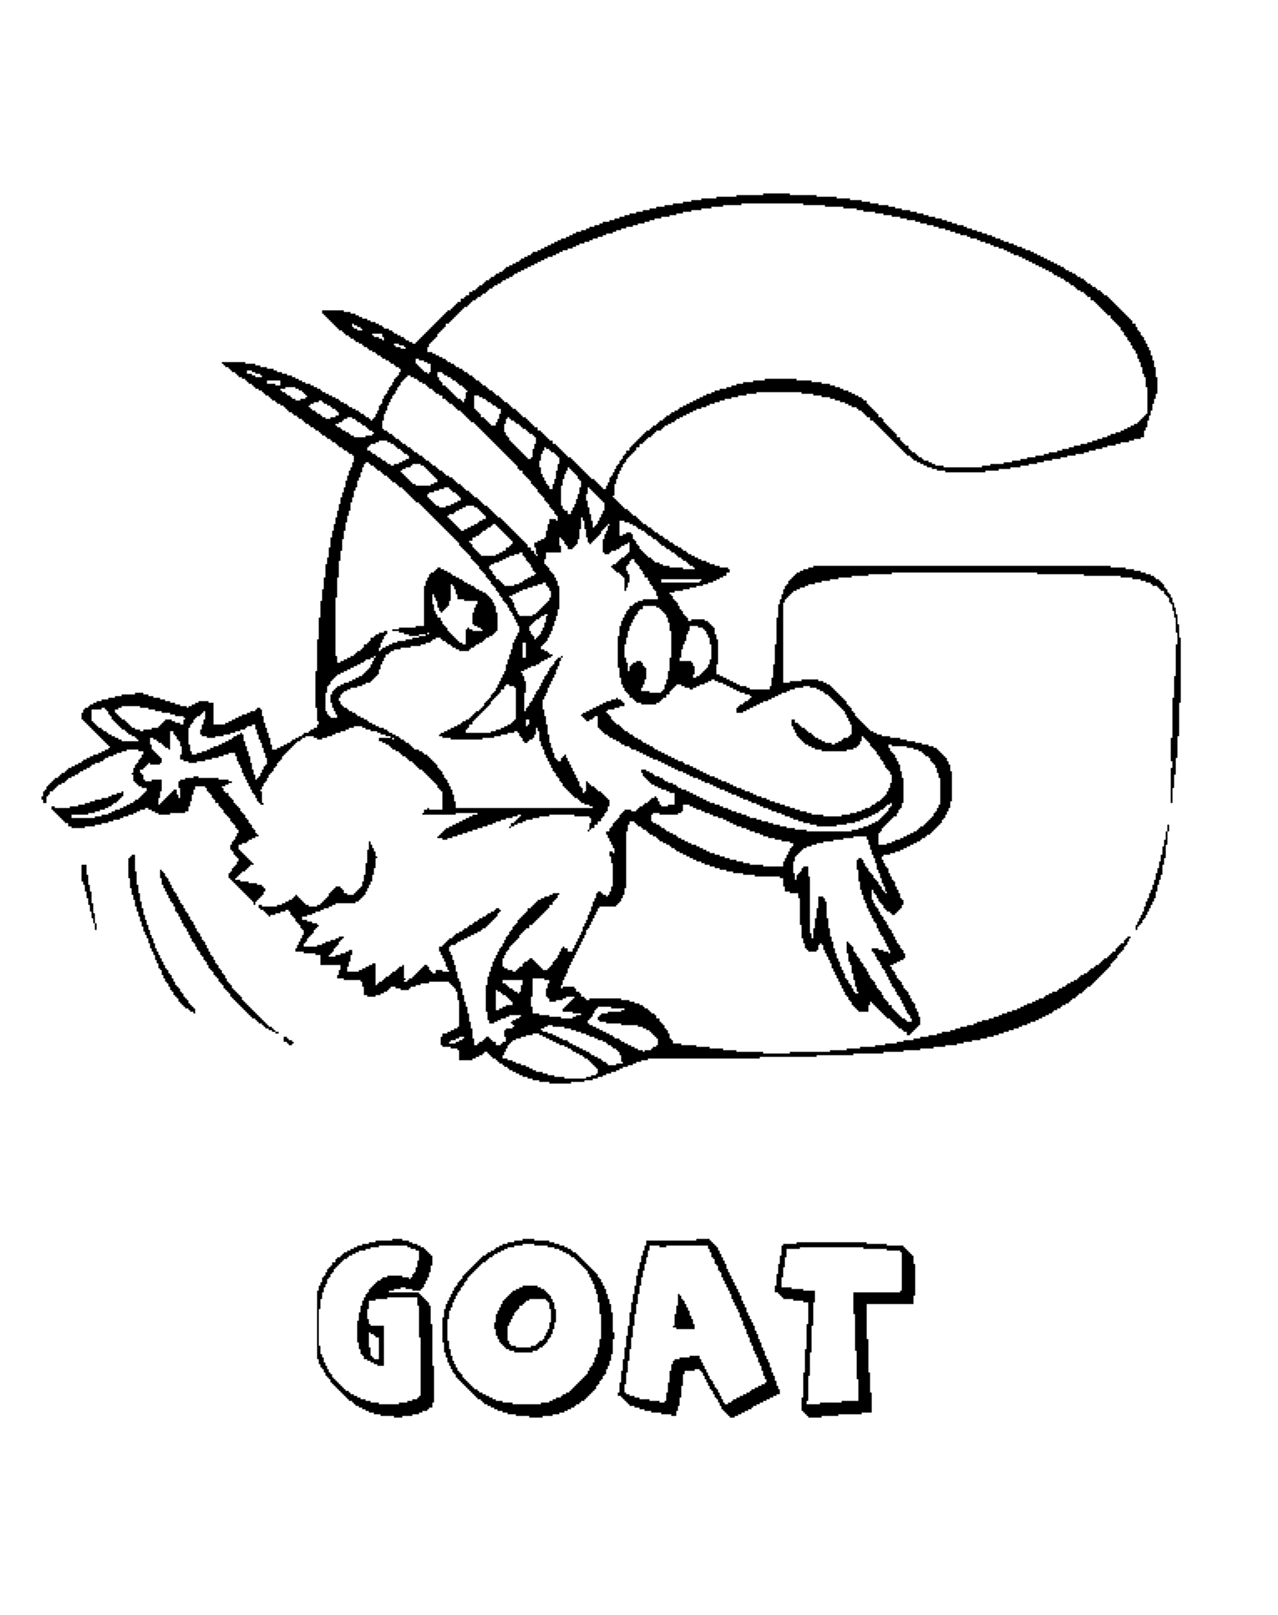 Coloring Pages Alphabet Animal Farm Goatb0f7 Coloring Page